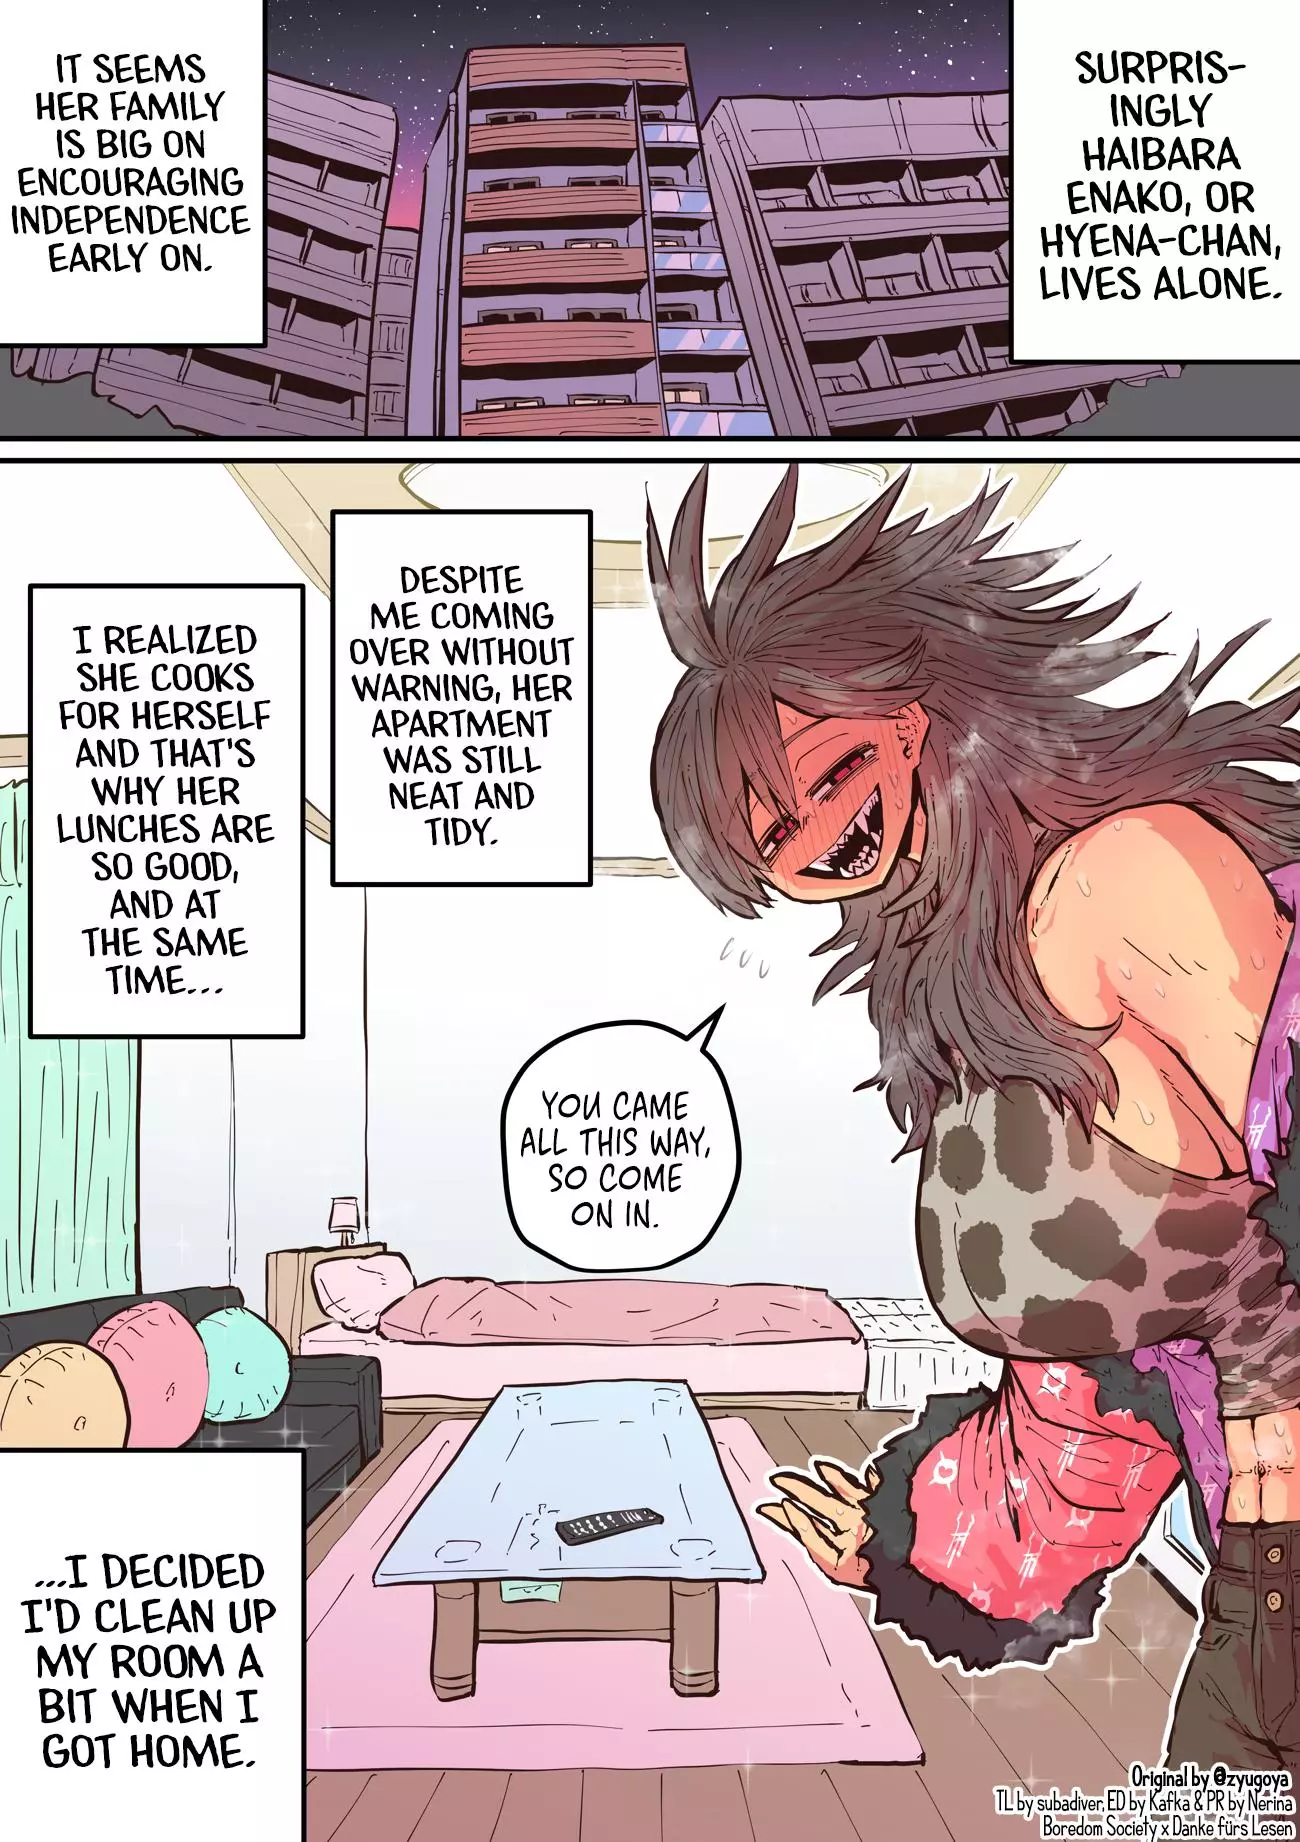 Being Targeted By Hyena-Chan - 9 page 1-36741082